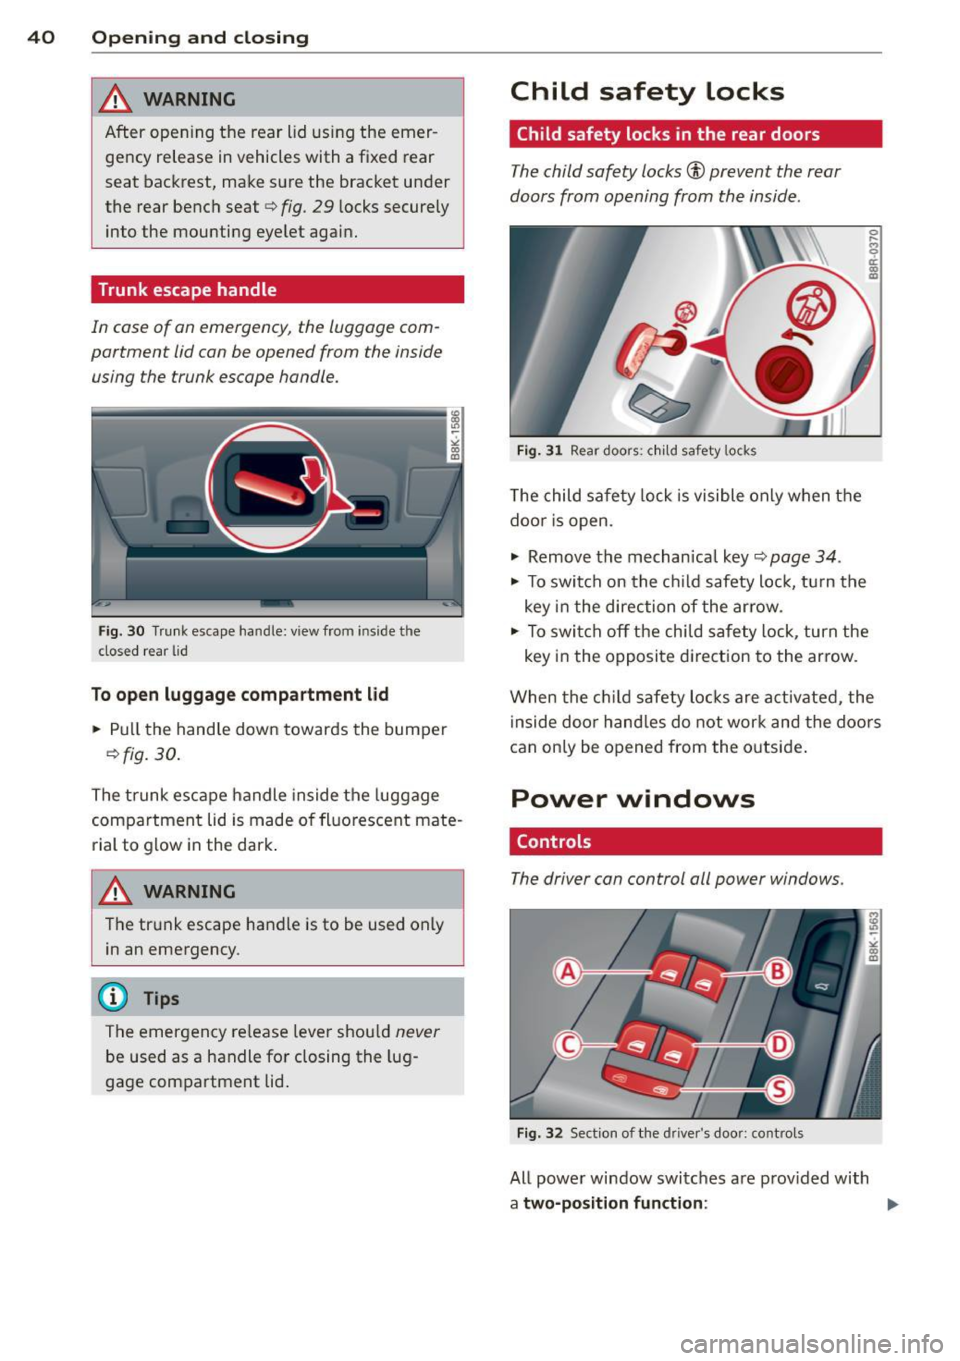 AUDI S4 SEDAN 2013  Owners Manual 40  Opening  and closing 
_&. WARNING 
After  opening  the  rear  lid  using the  emer ­
gency  release  in vehicles  with  a  fixed  rear 
seat  backrest,  make  sure  the  bracket  under 
the  rear